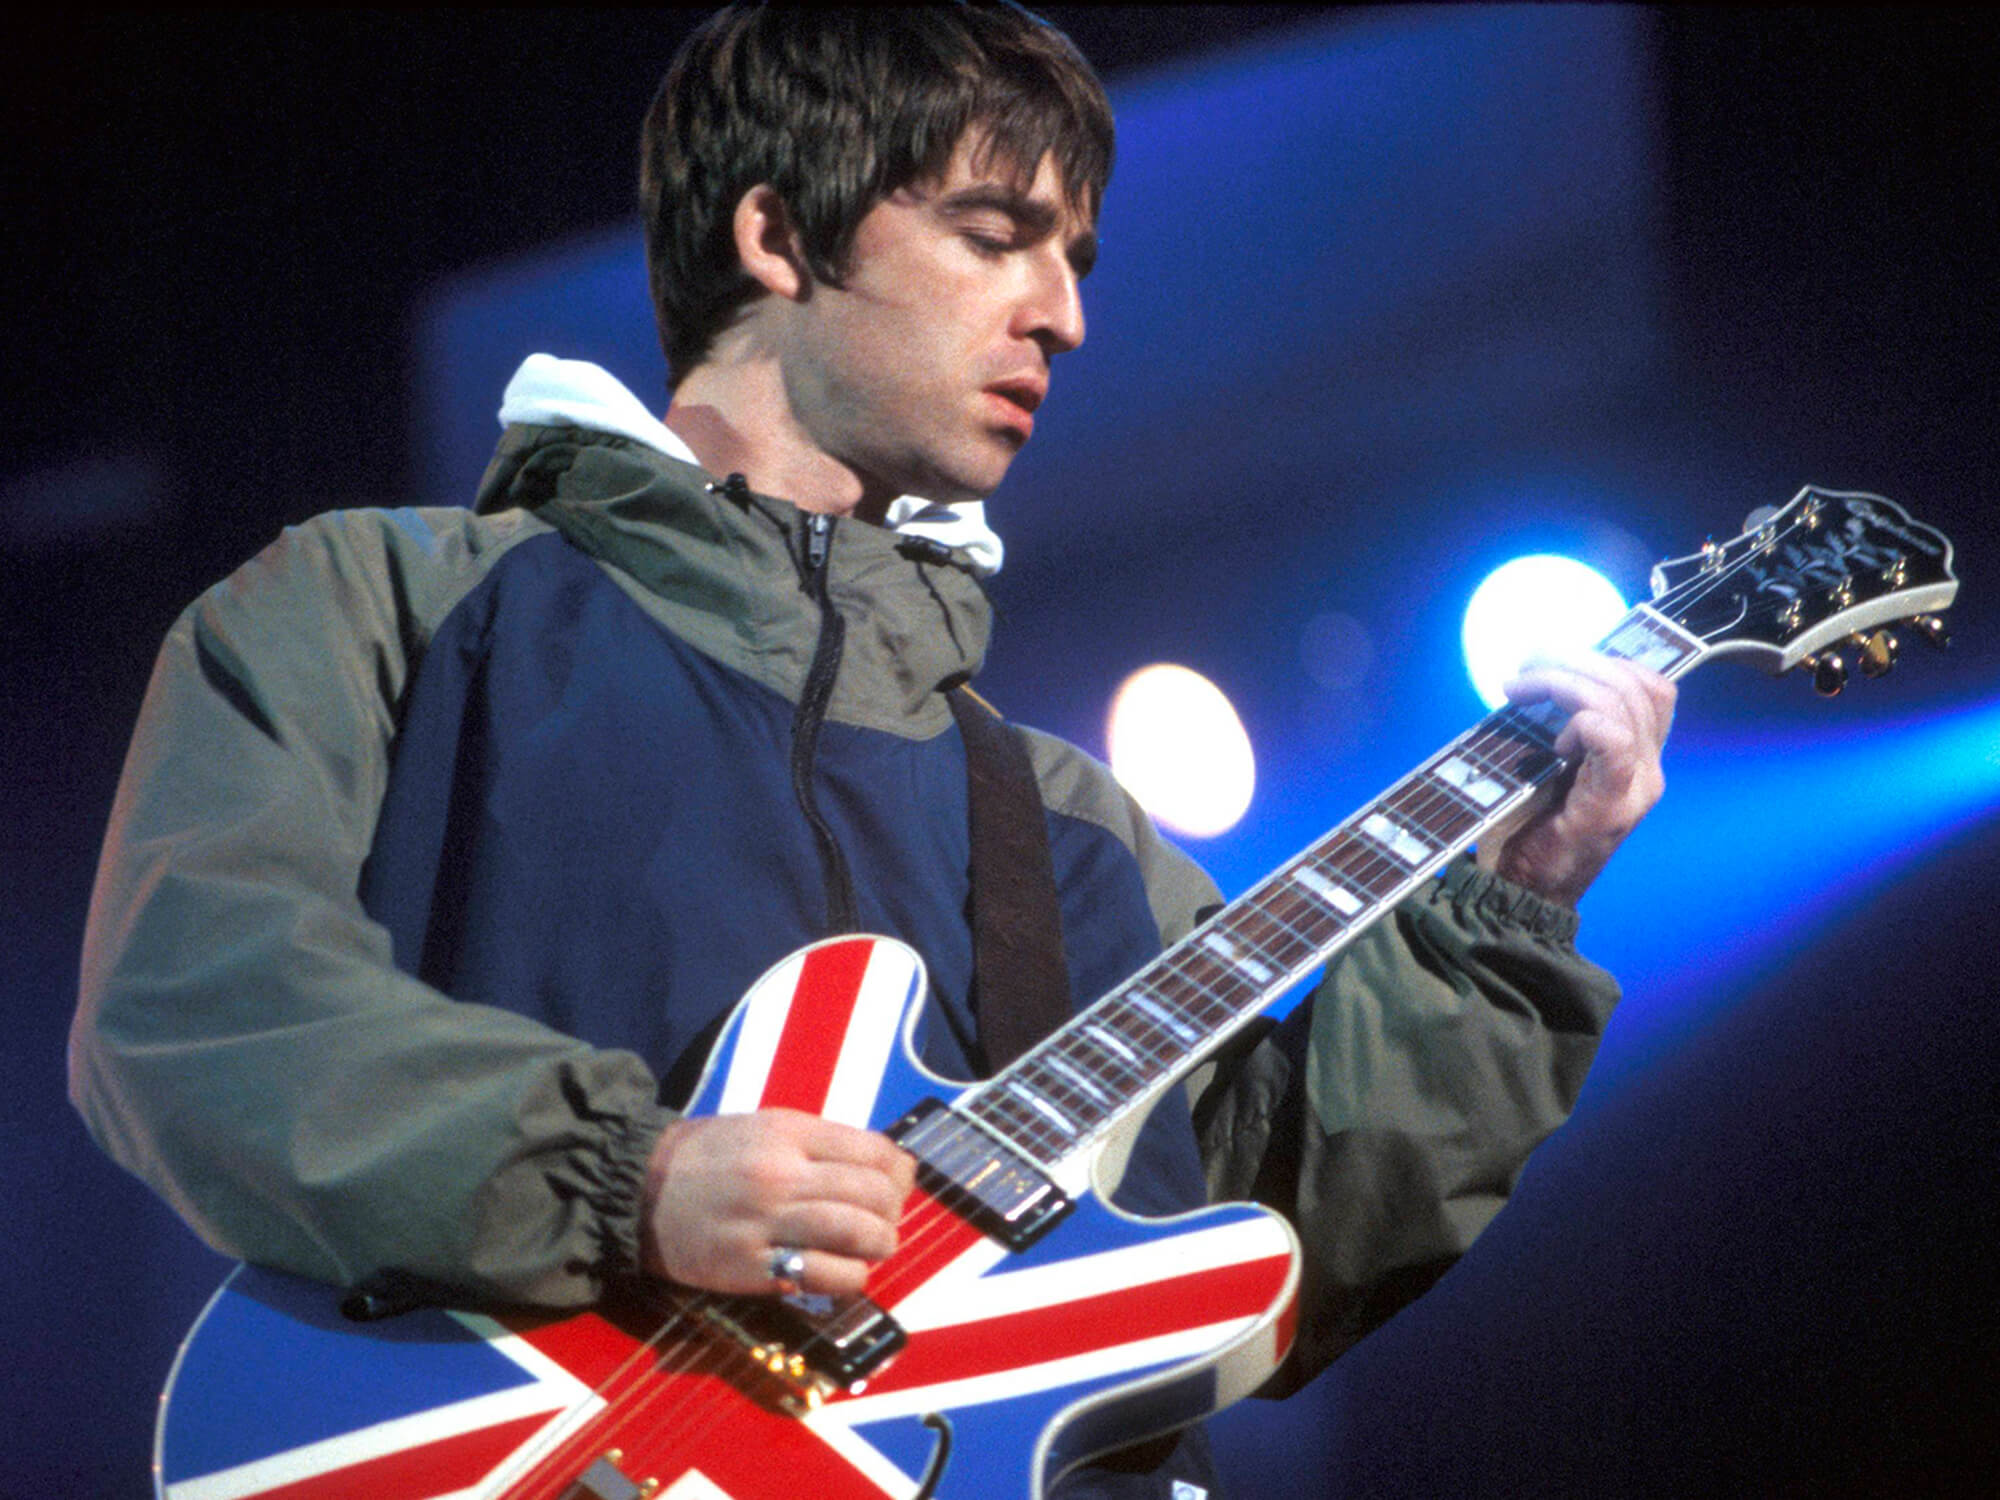 Noel Gallagher playing an Epiphone Sheraton Union Jack guitar onstage in 1996 by Patrick Ford/Redferns via Getty Images